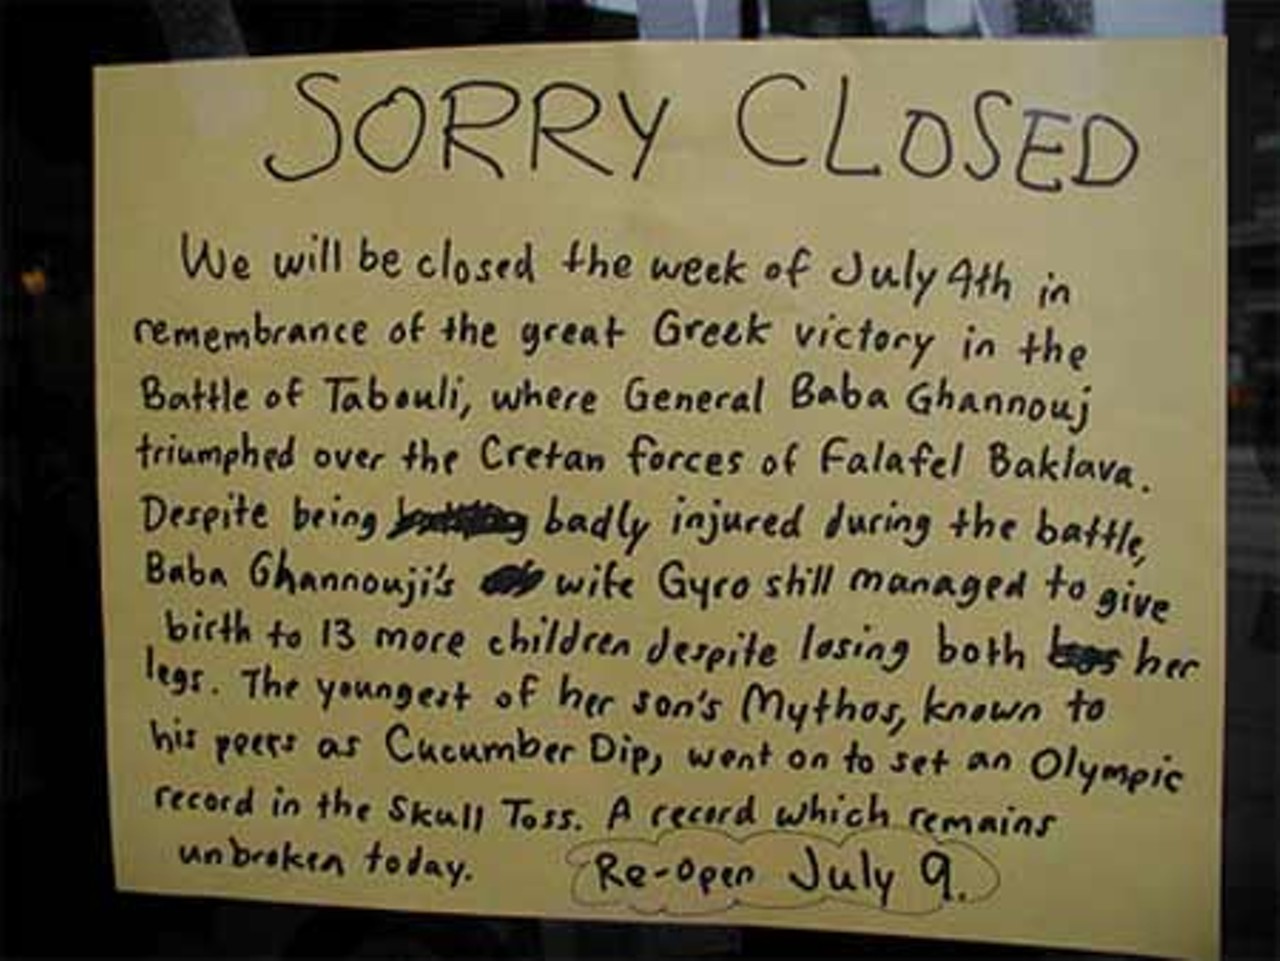 This has been dubbed the "Best Closed Sign Ever." It is pretty good.